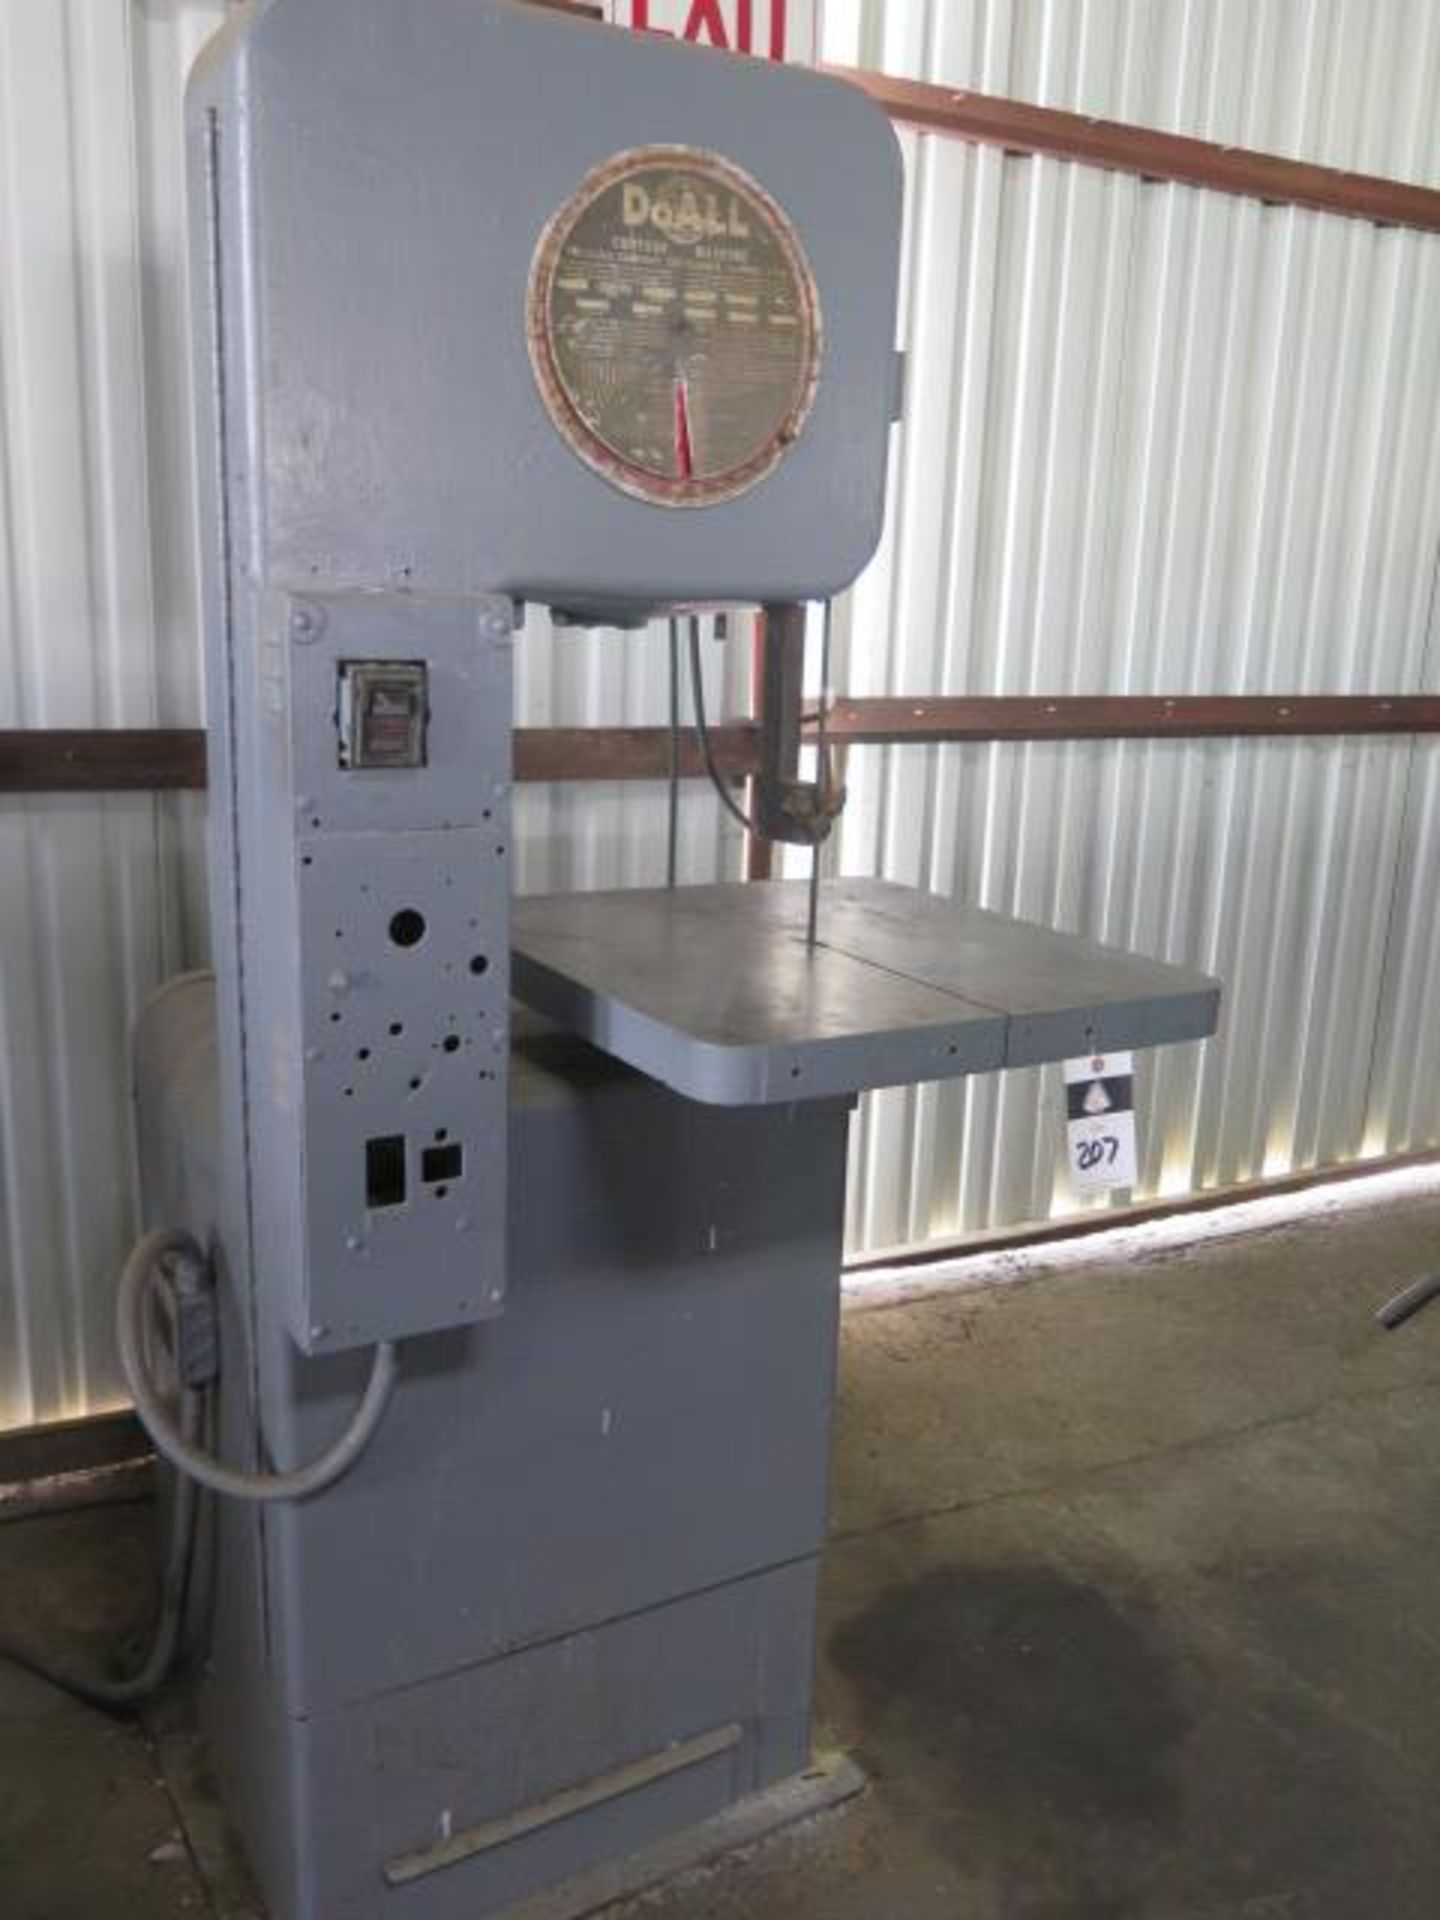 DoAll 1612-U 16” Vertical Band Saw s/n 146-631579 (SOLD AS-IS - NO WARRANTY) - Image 2 of 7